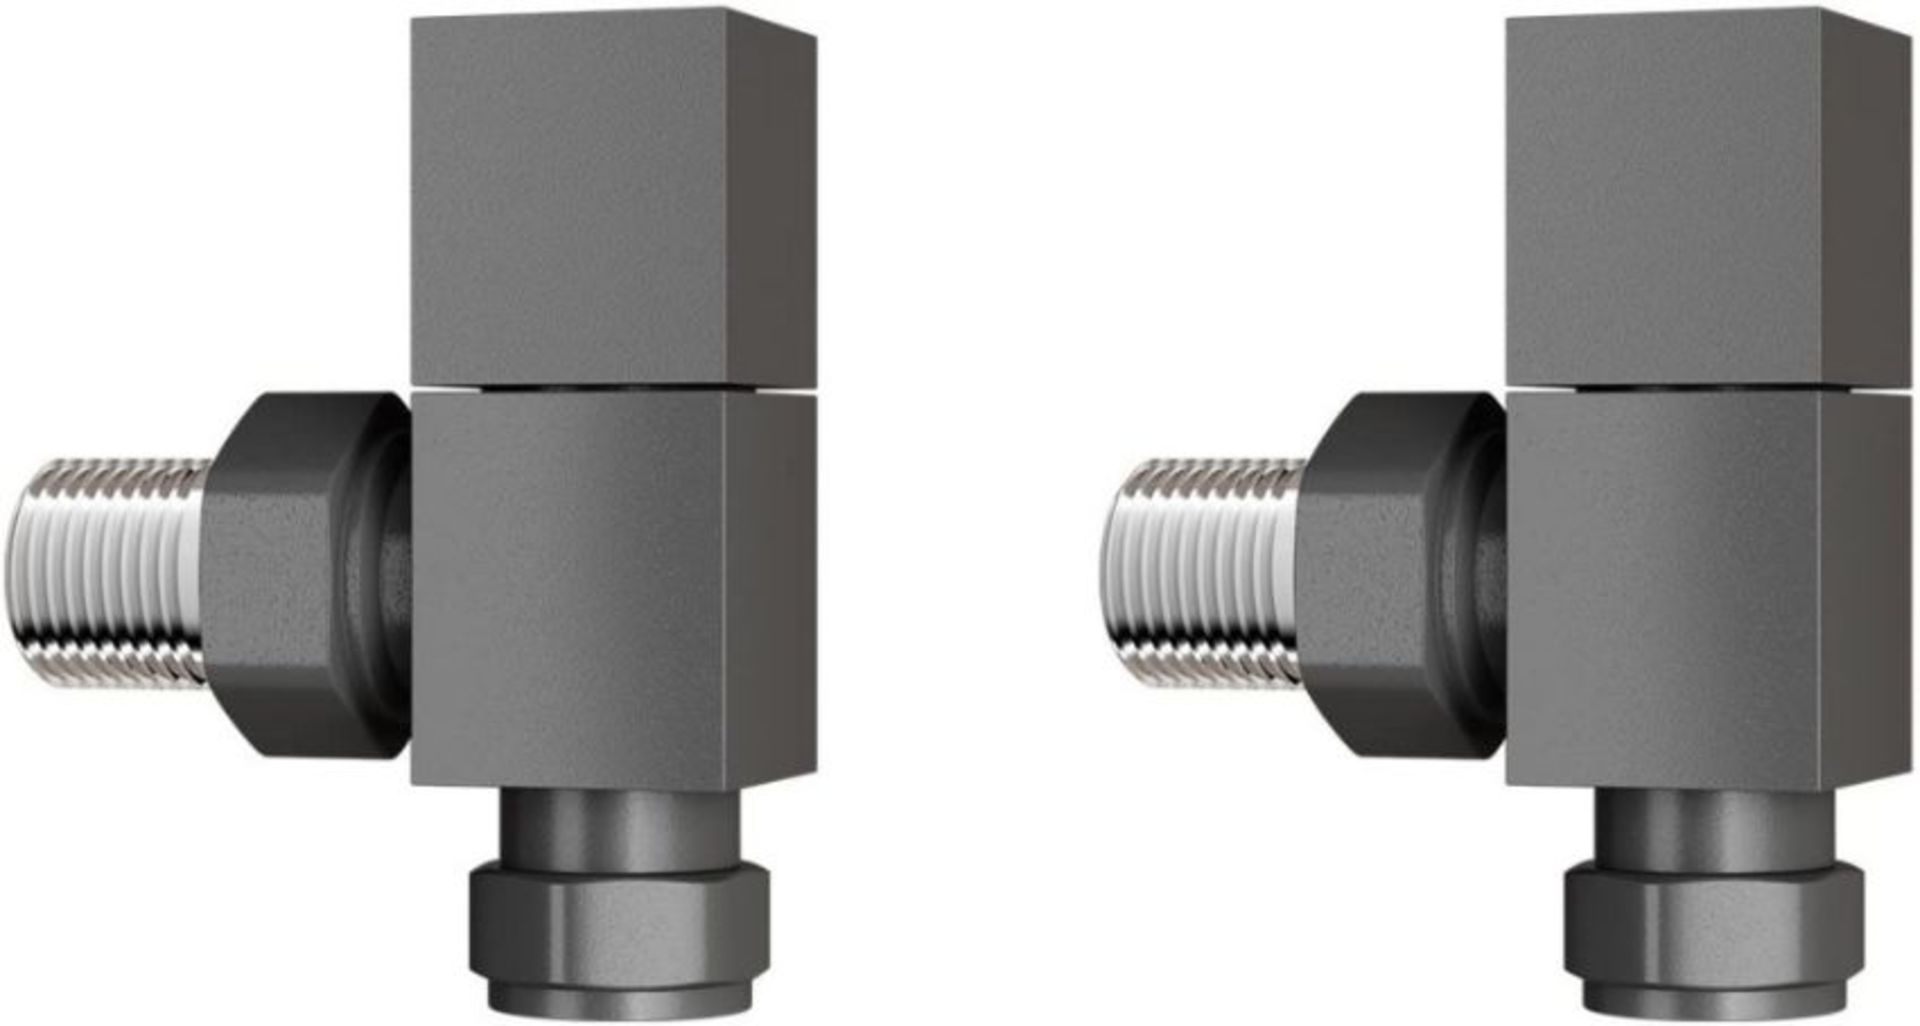 New 15 mm Standard Connection Square Angled Anthracite Radiator Valves. Ra03A. Complies With Bs27...